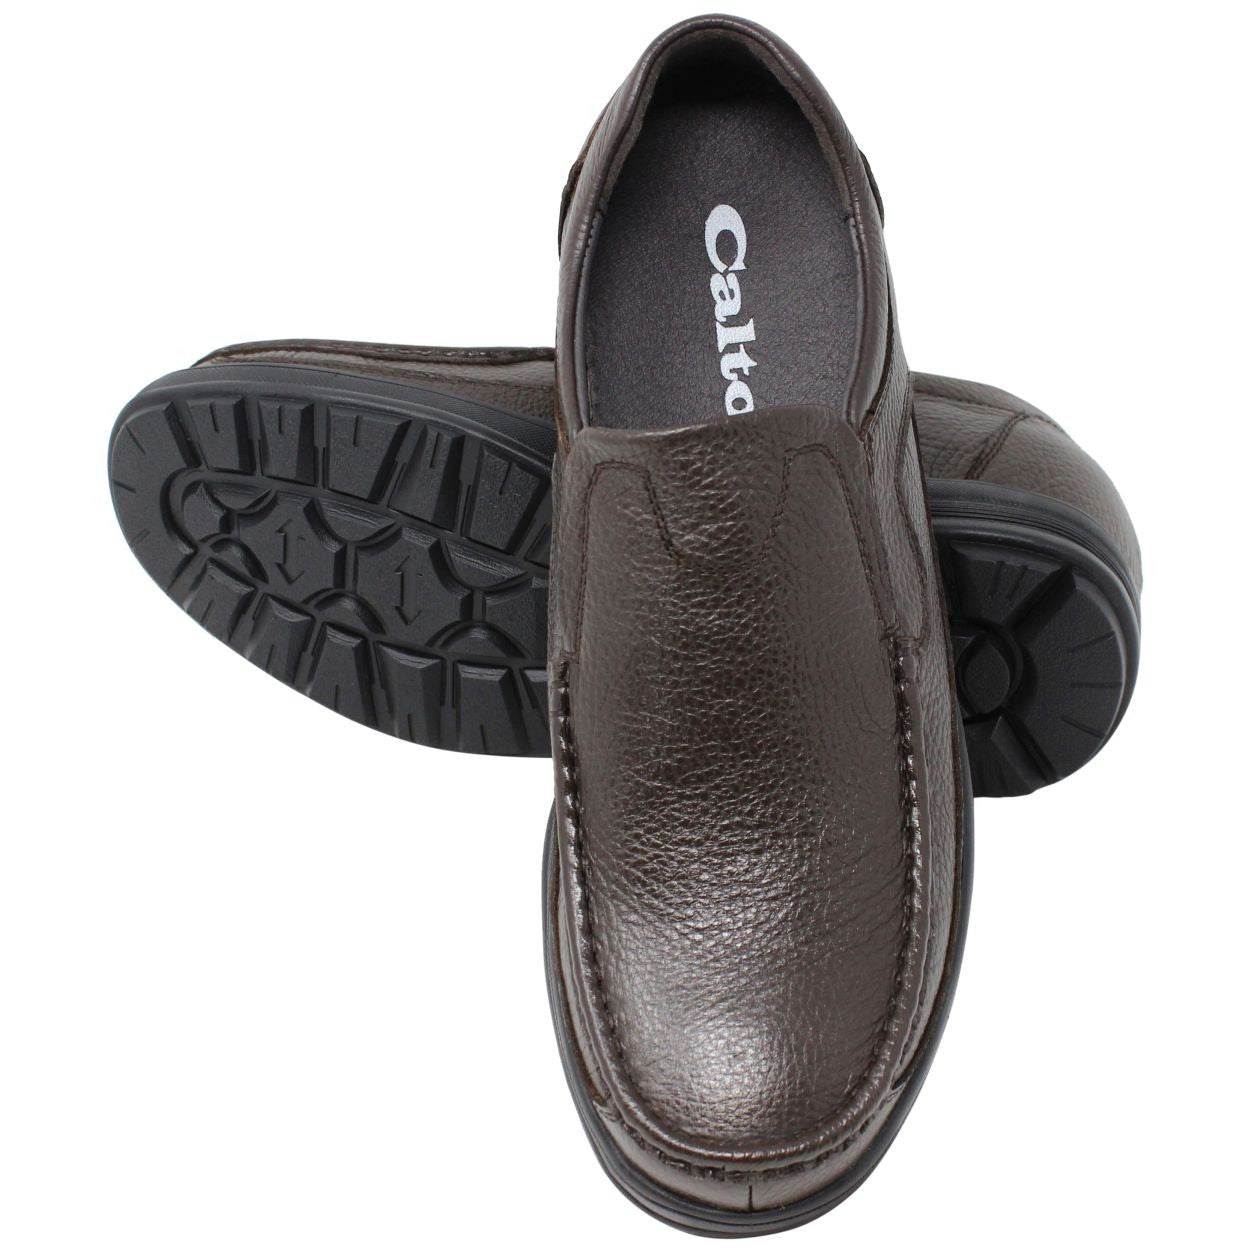 Elevator shoes height increase CALTO Lightweight Brown Slip-On Loafer Dress Shoes - G1823